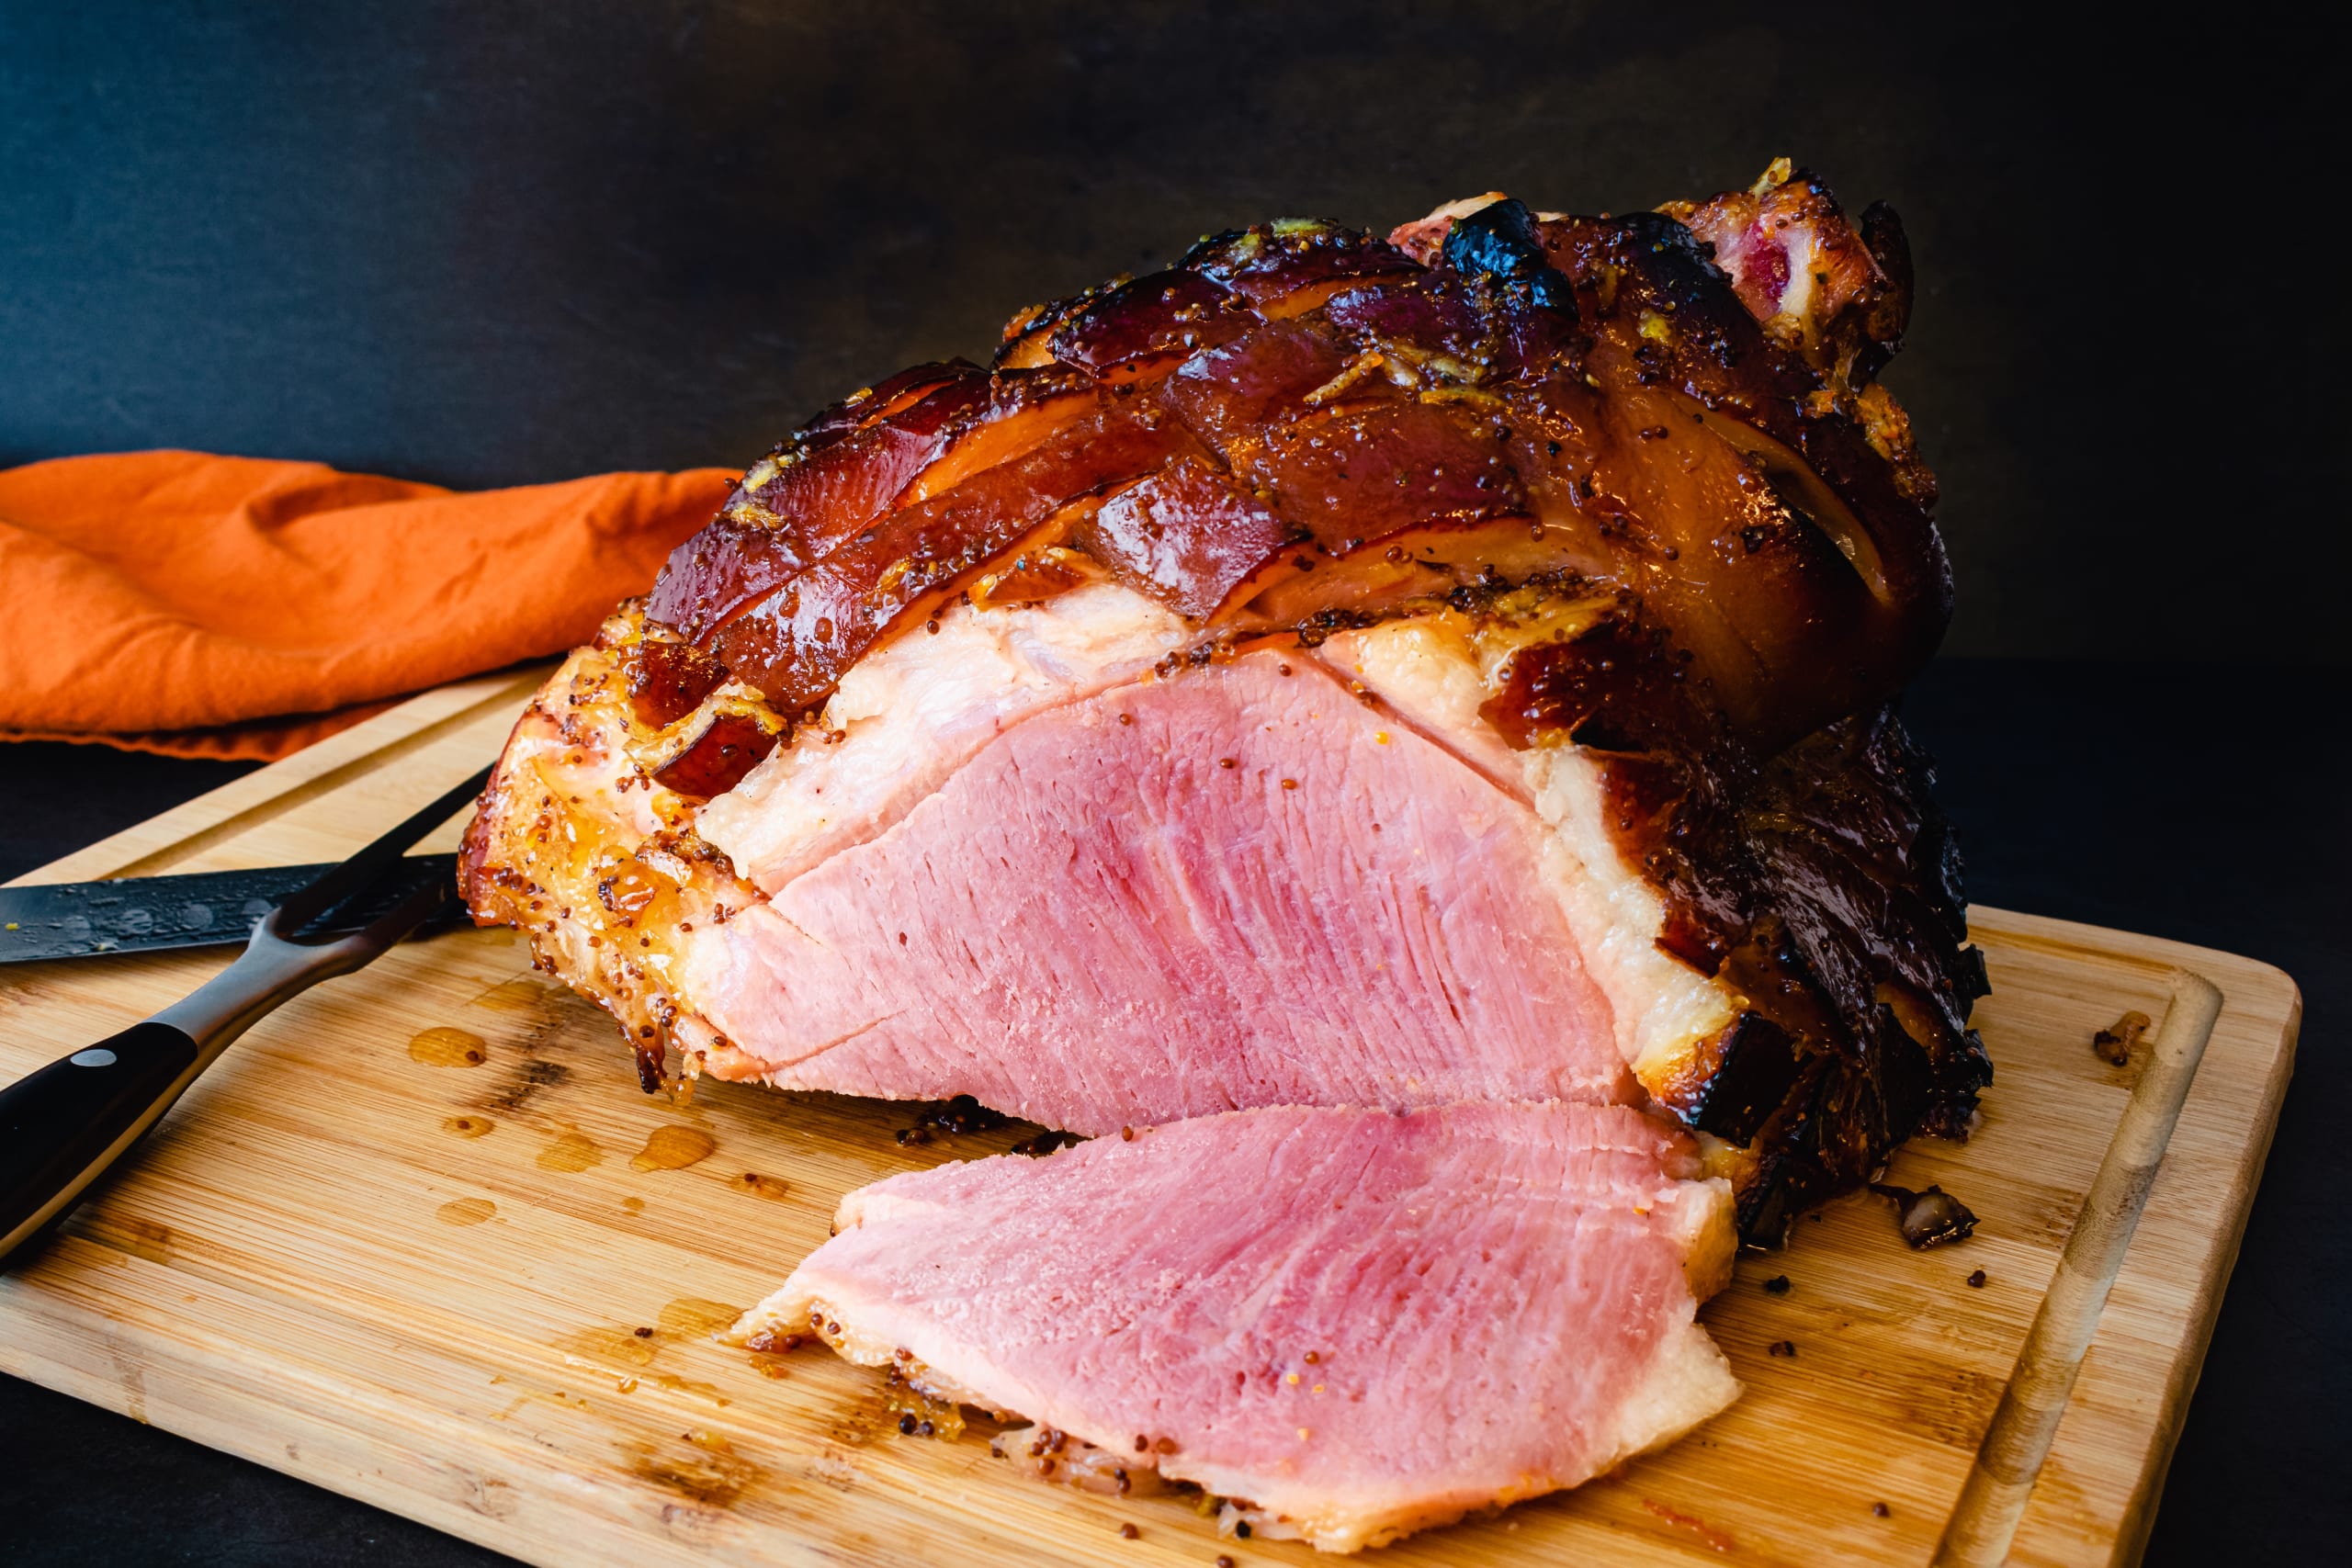 Making an Easter ham? Make sure it has the best glaze